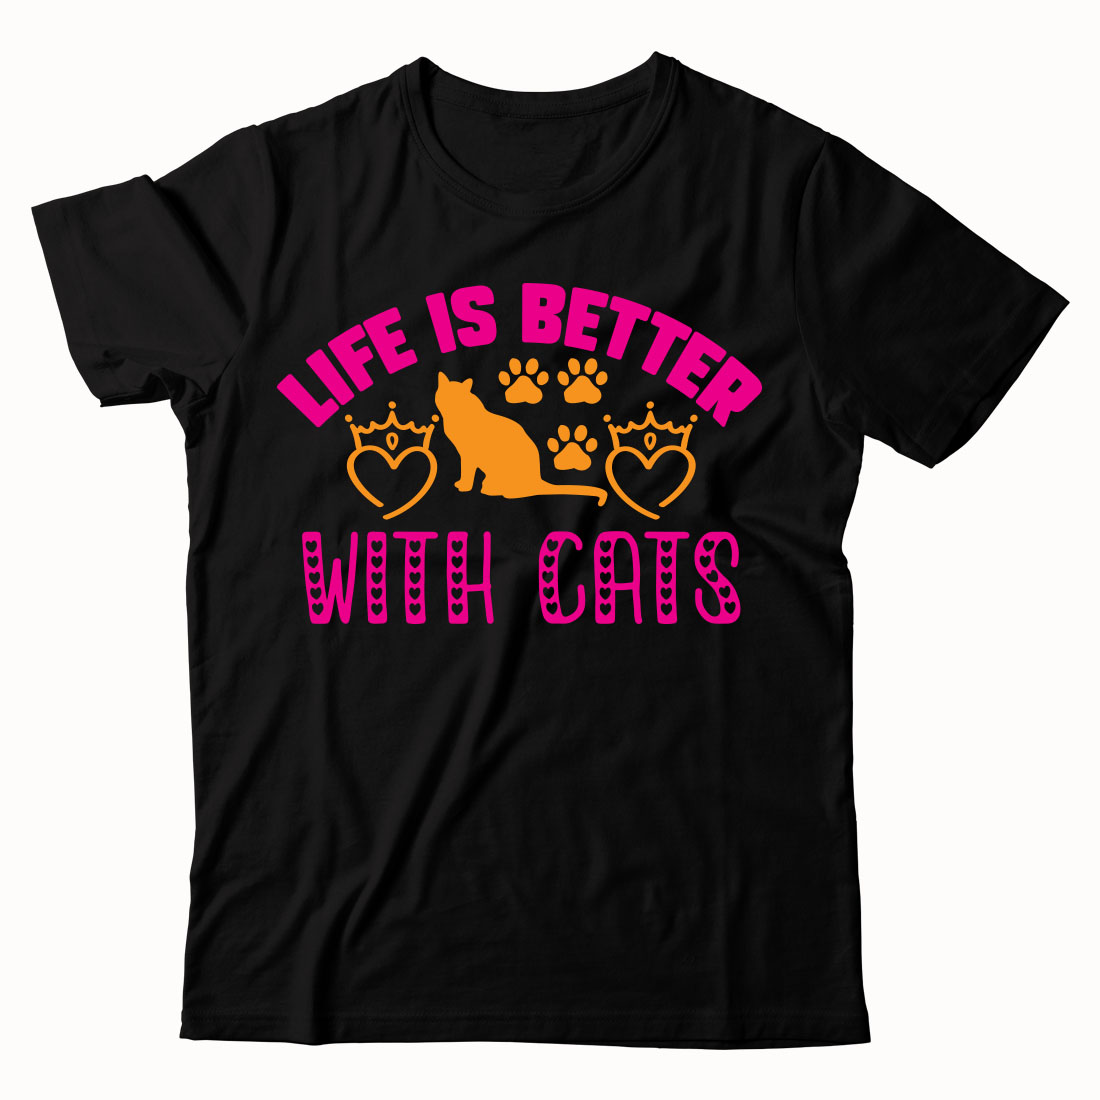 Black t - shirt with a cat saying life is better with cats.